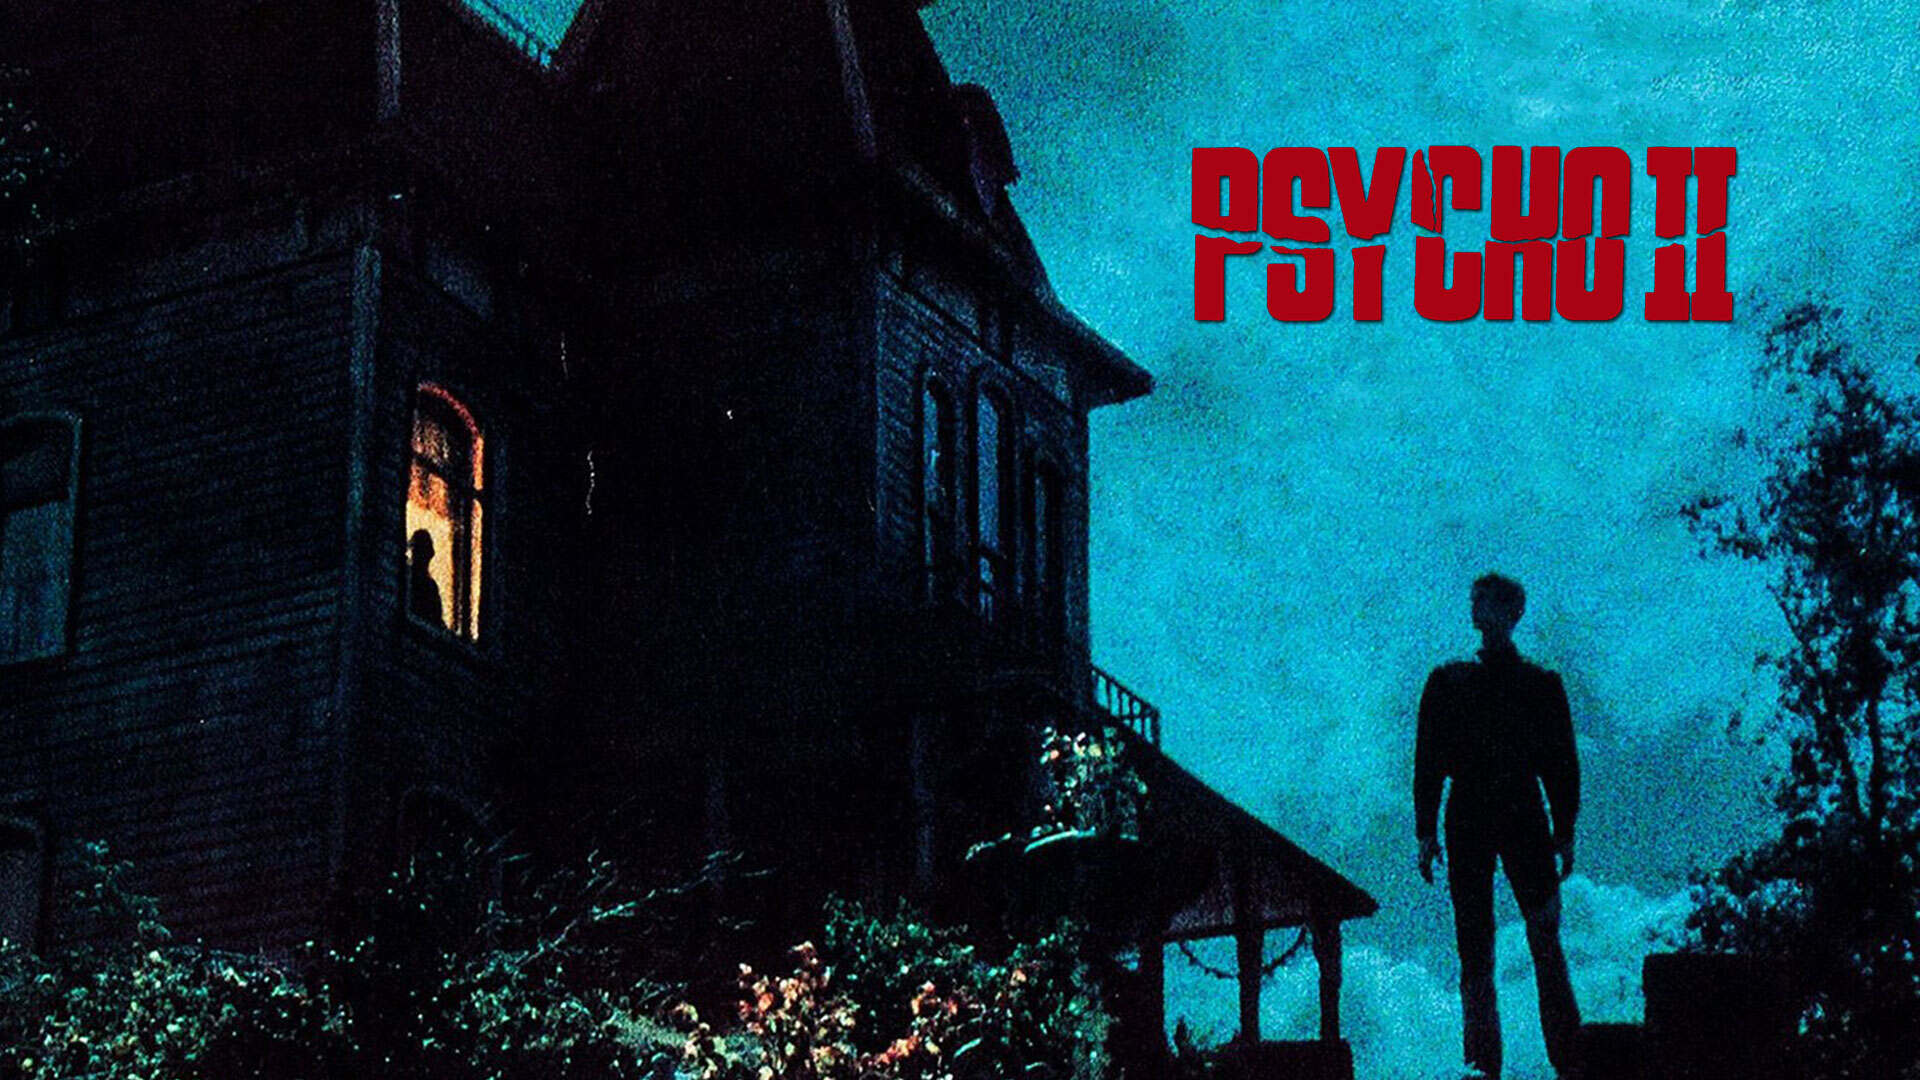 39-facts-about-the-movie-psycho-ii